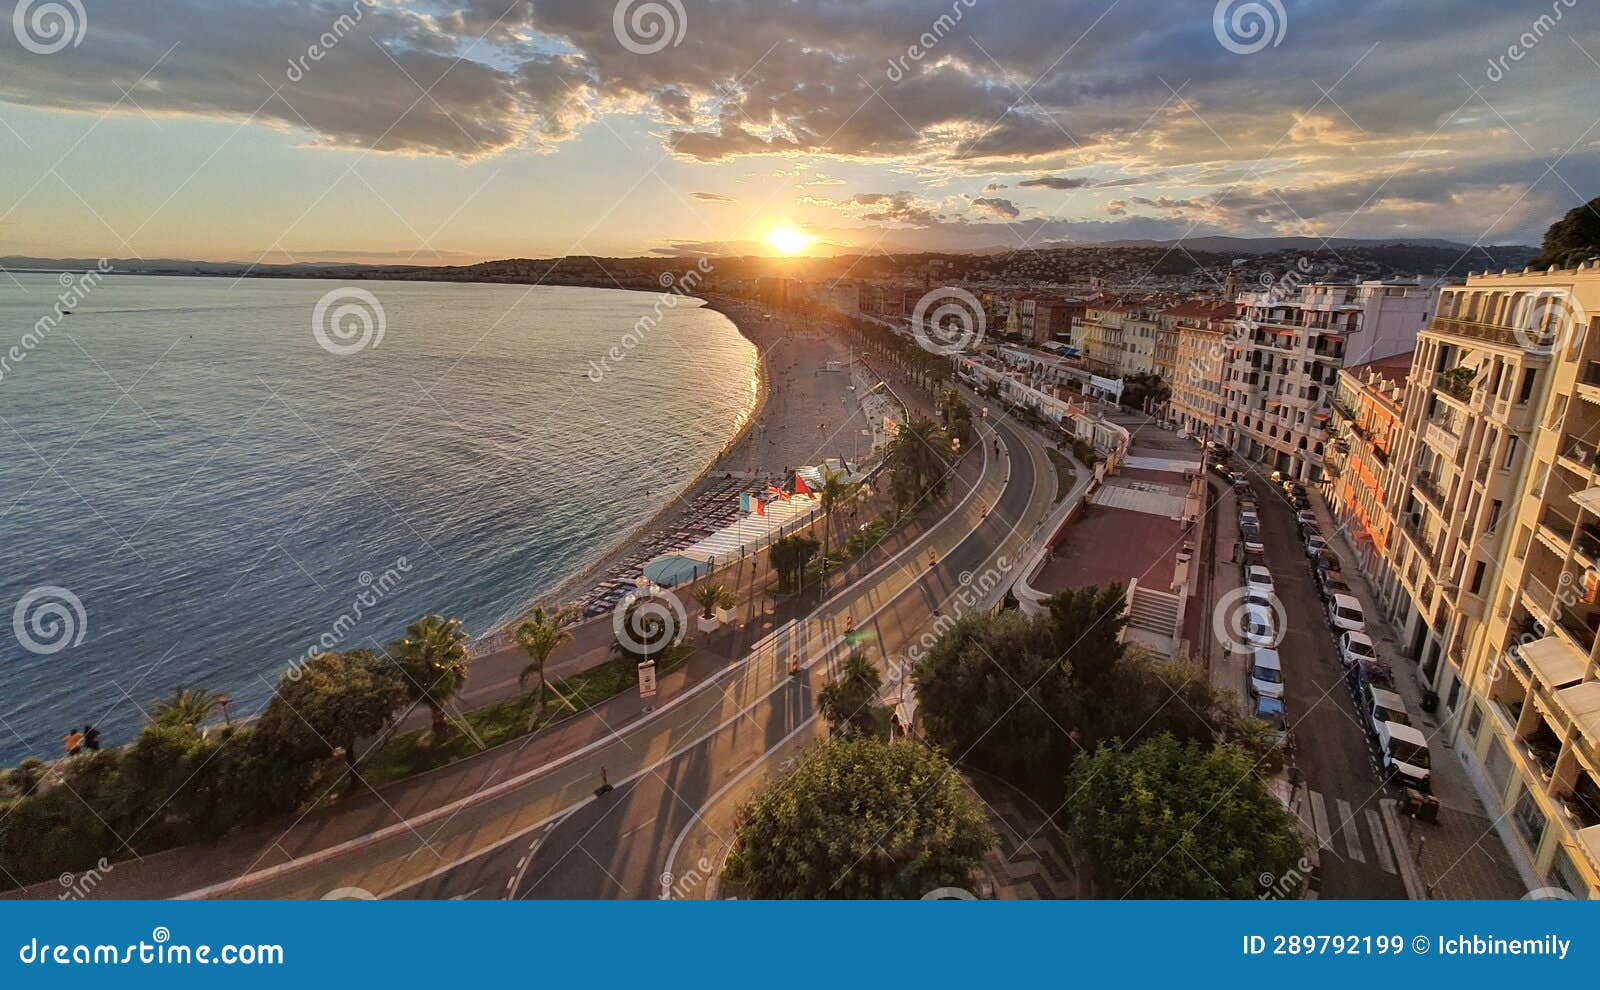 summer nizza france pictura view